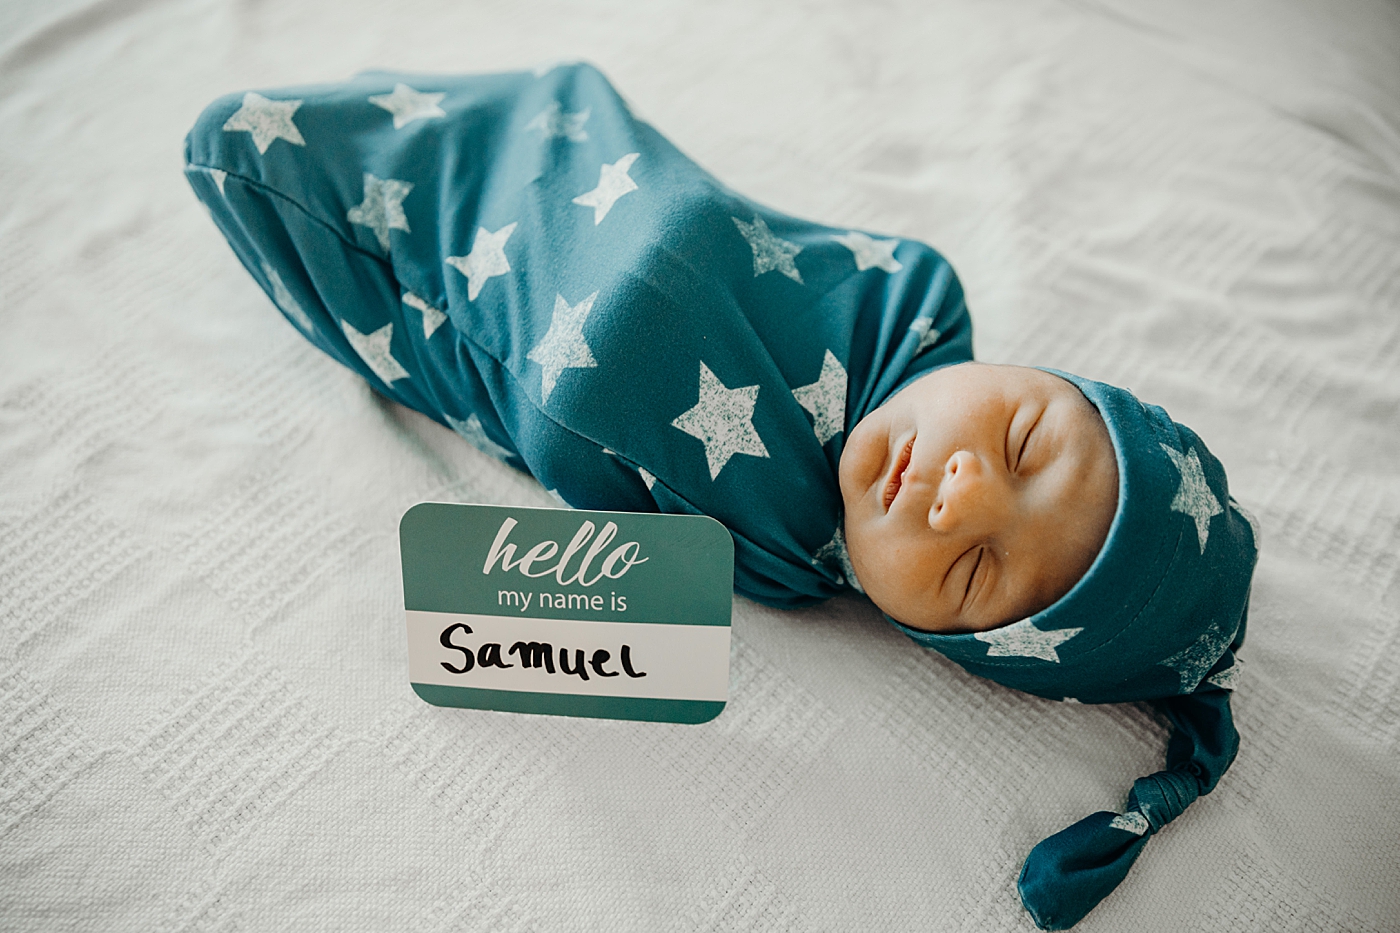 Baby in star swaddle with name tag South Florida Fresh 48 Newborn Photography by South Florida Family Photographer Maggie Alvarez Photography 